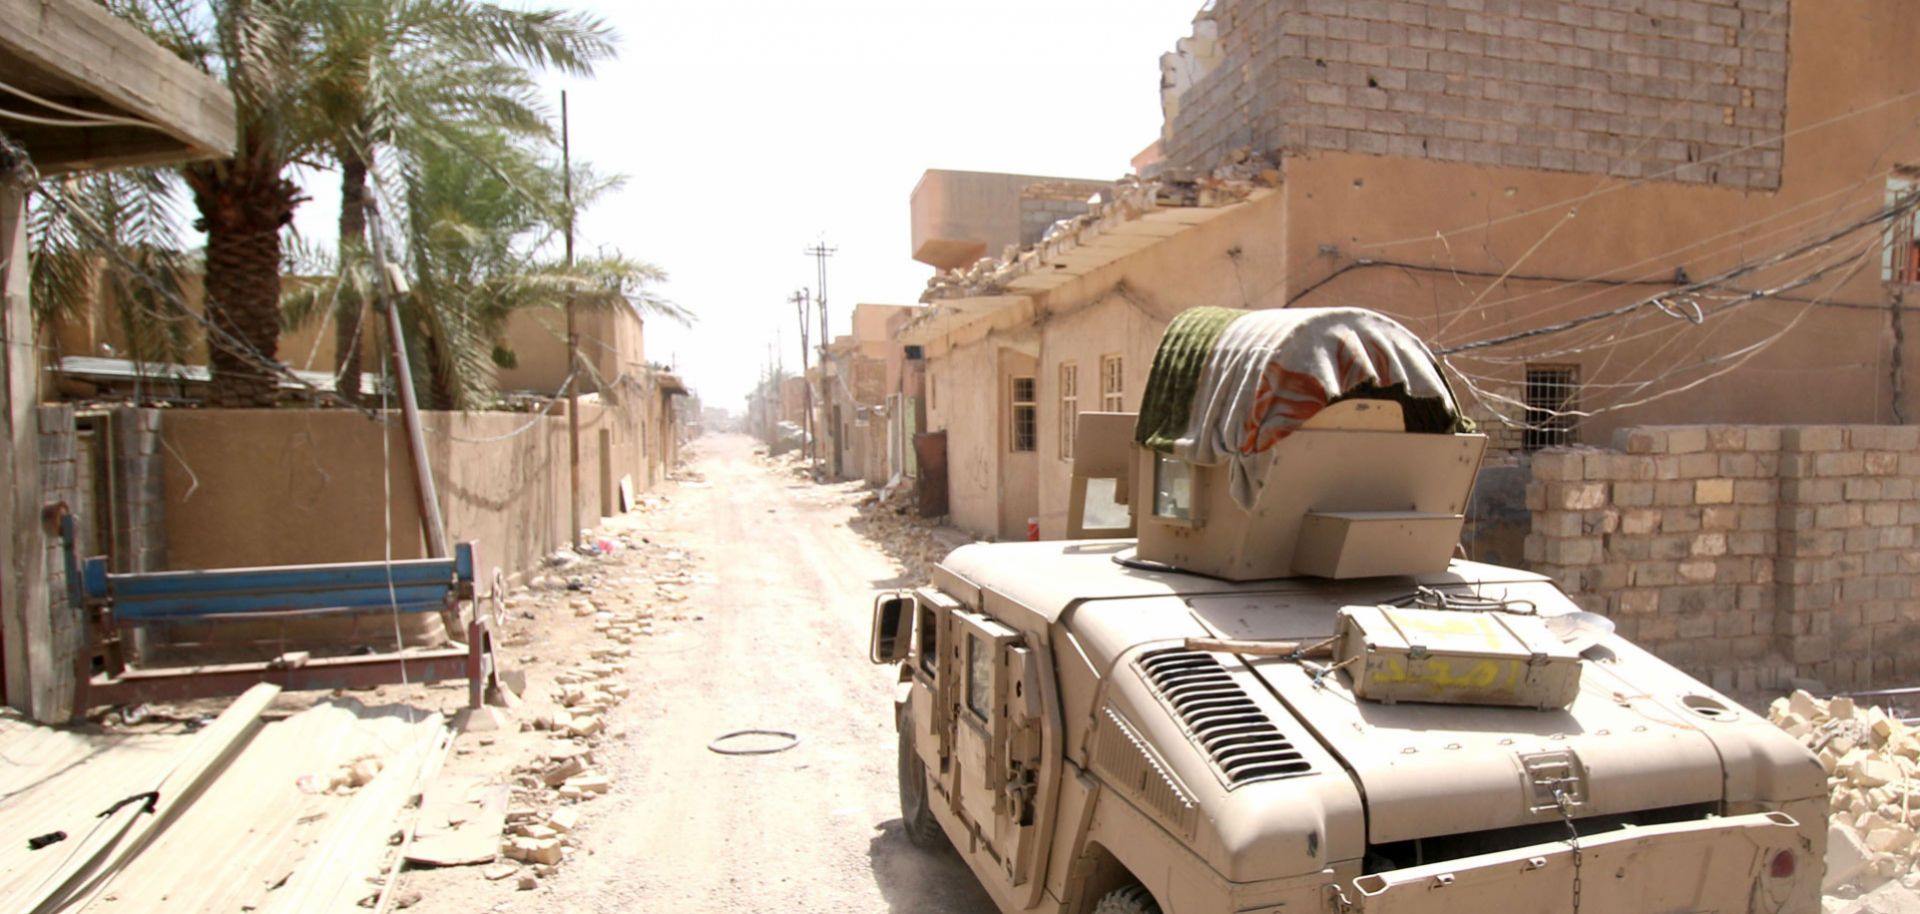 An Iraqi army Humvee on patrol in Fallujah as security forces wrest control from the Islamic State